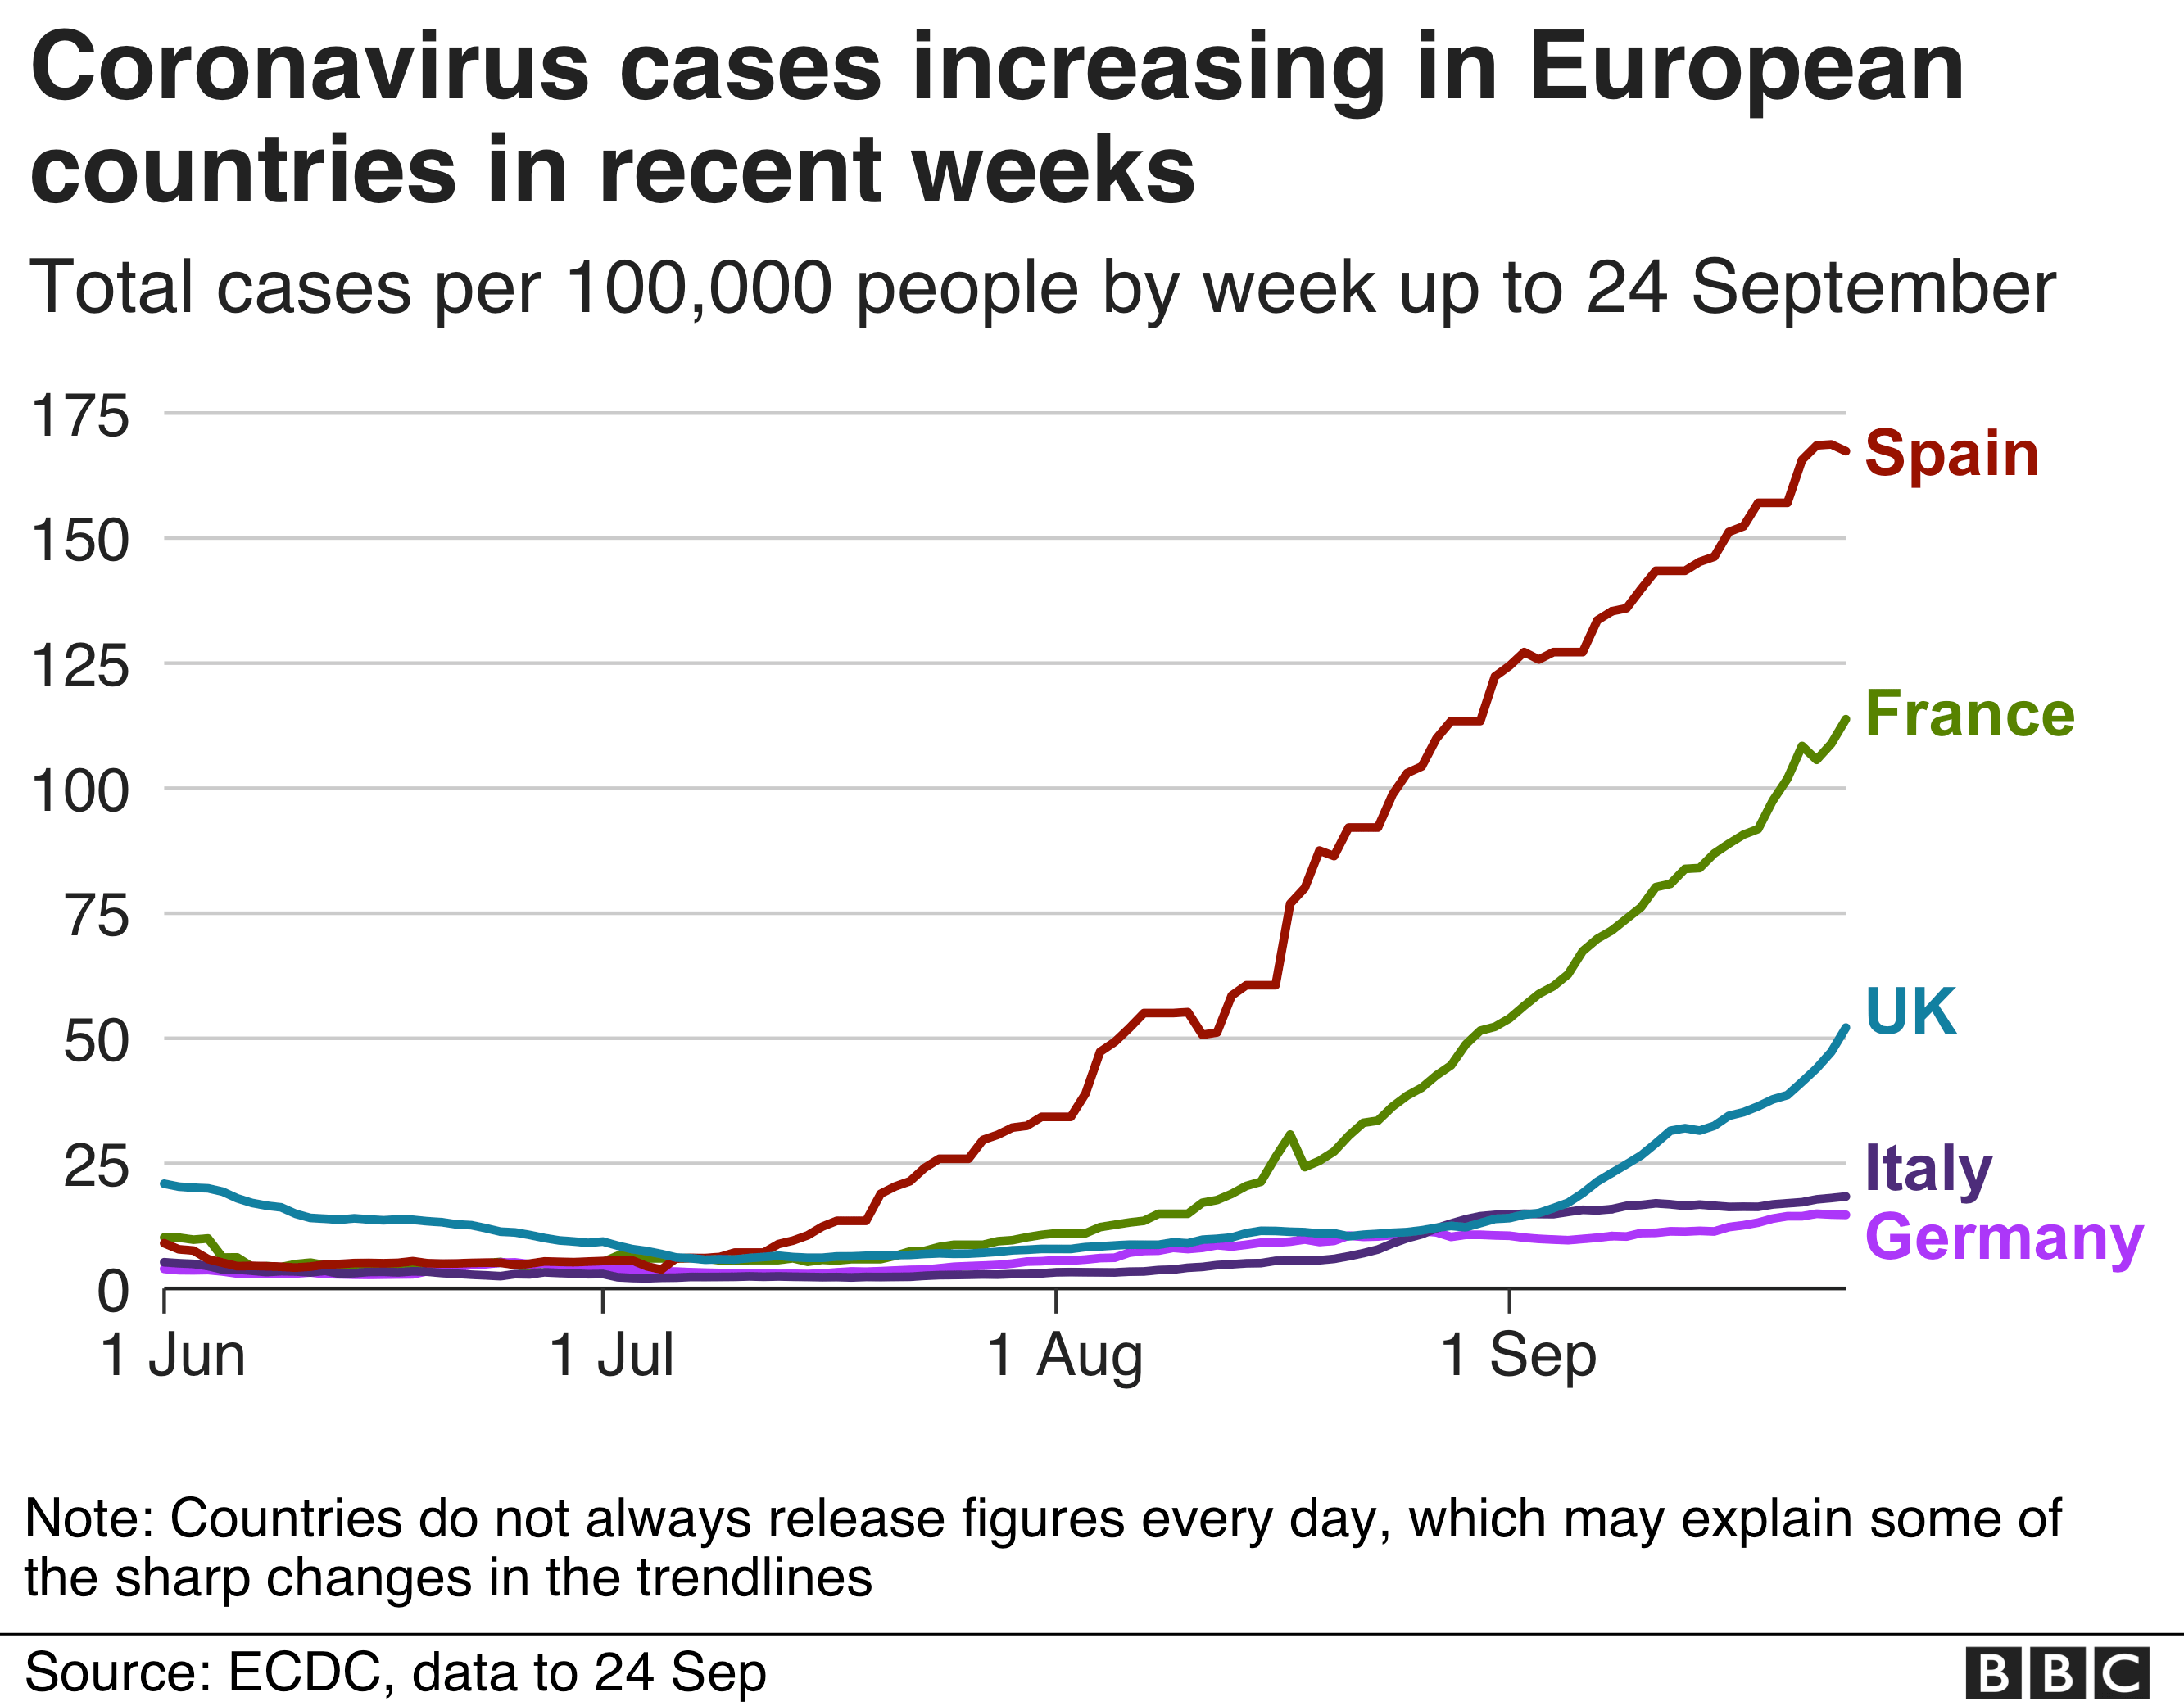 Line chart shows cases are increasing fast in Spain, France, UK, and slower in Italy and Germany